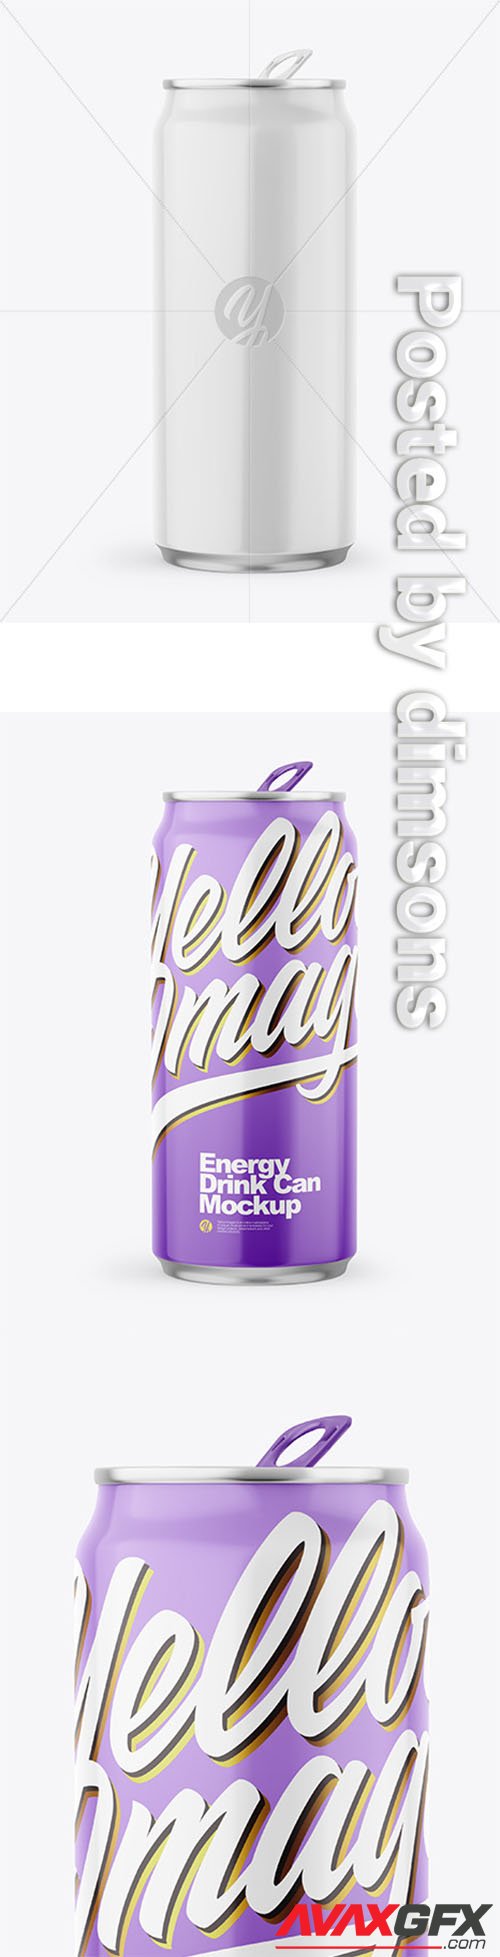 Download Two Metallic Drink Cans w/ Glossy Finish Mockup 68627 » AVAXGFX - All Downloads that You Need in ...